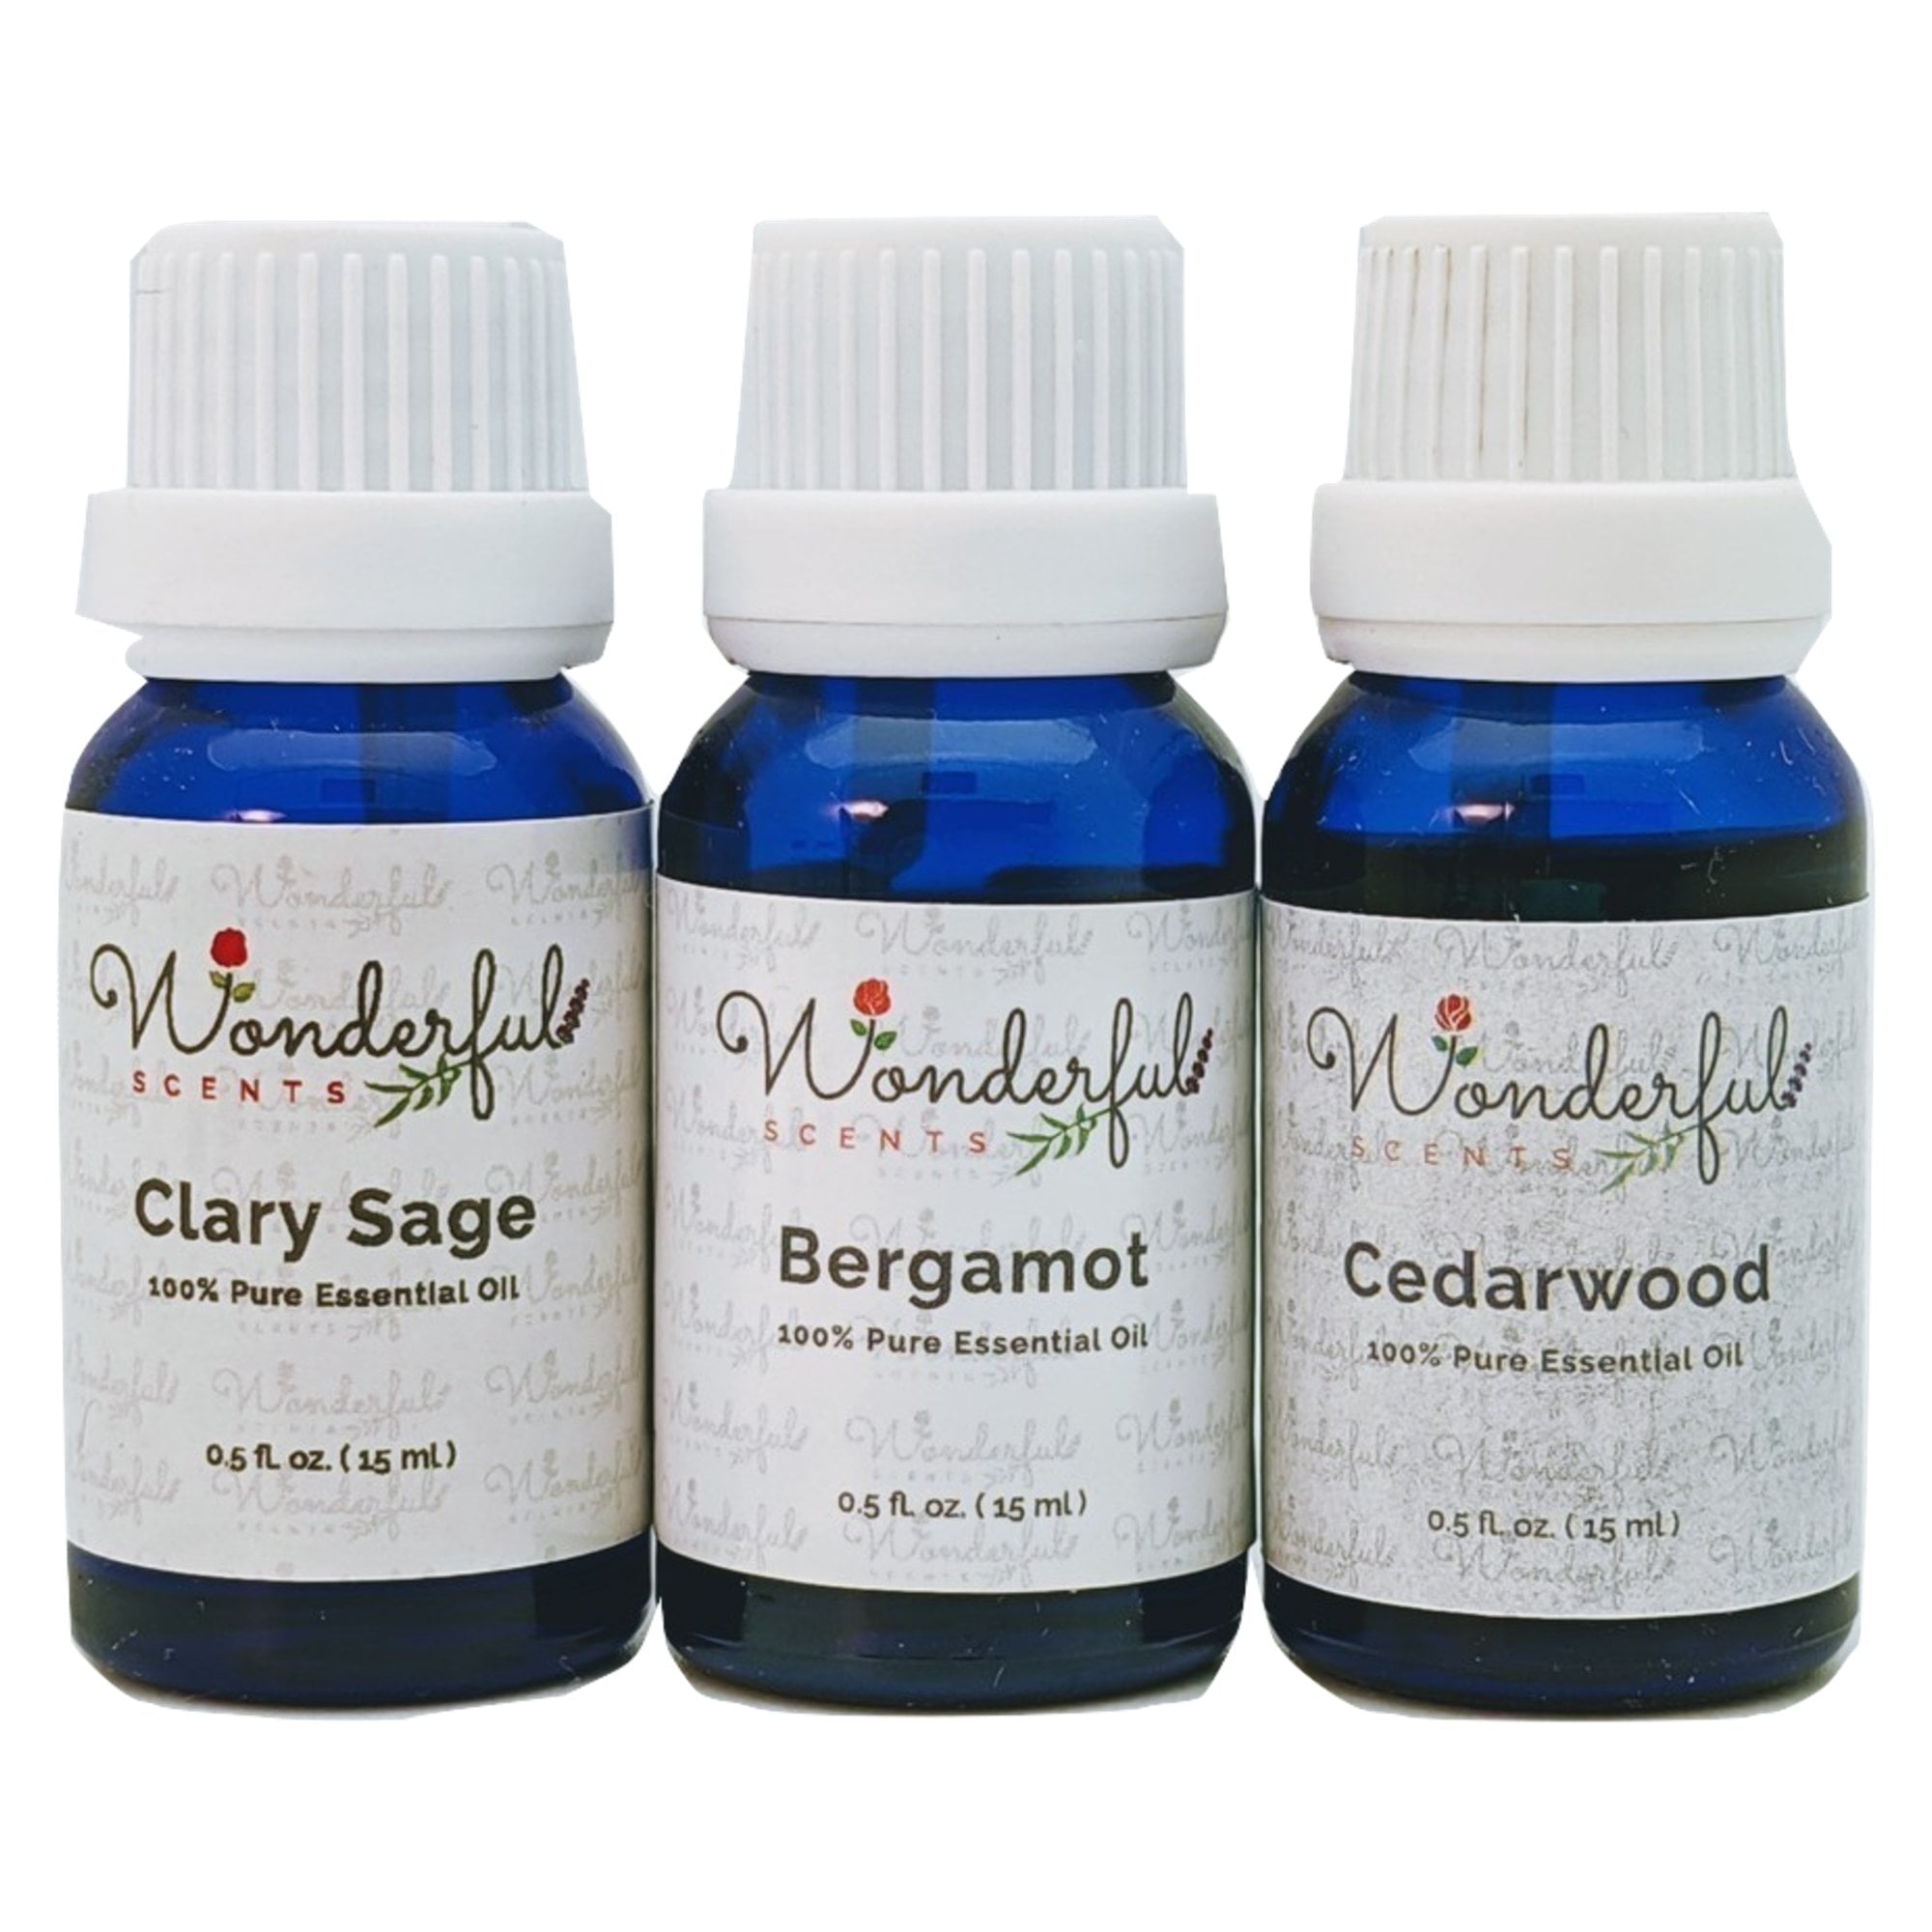 Wonderful Scents Essential Oil Diffuser Blends - Save 20%